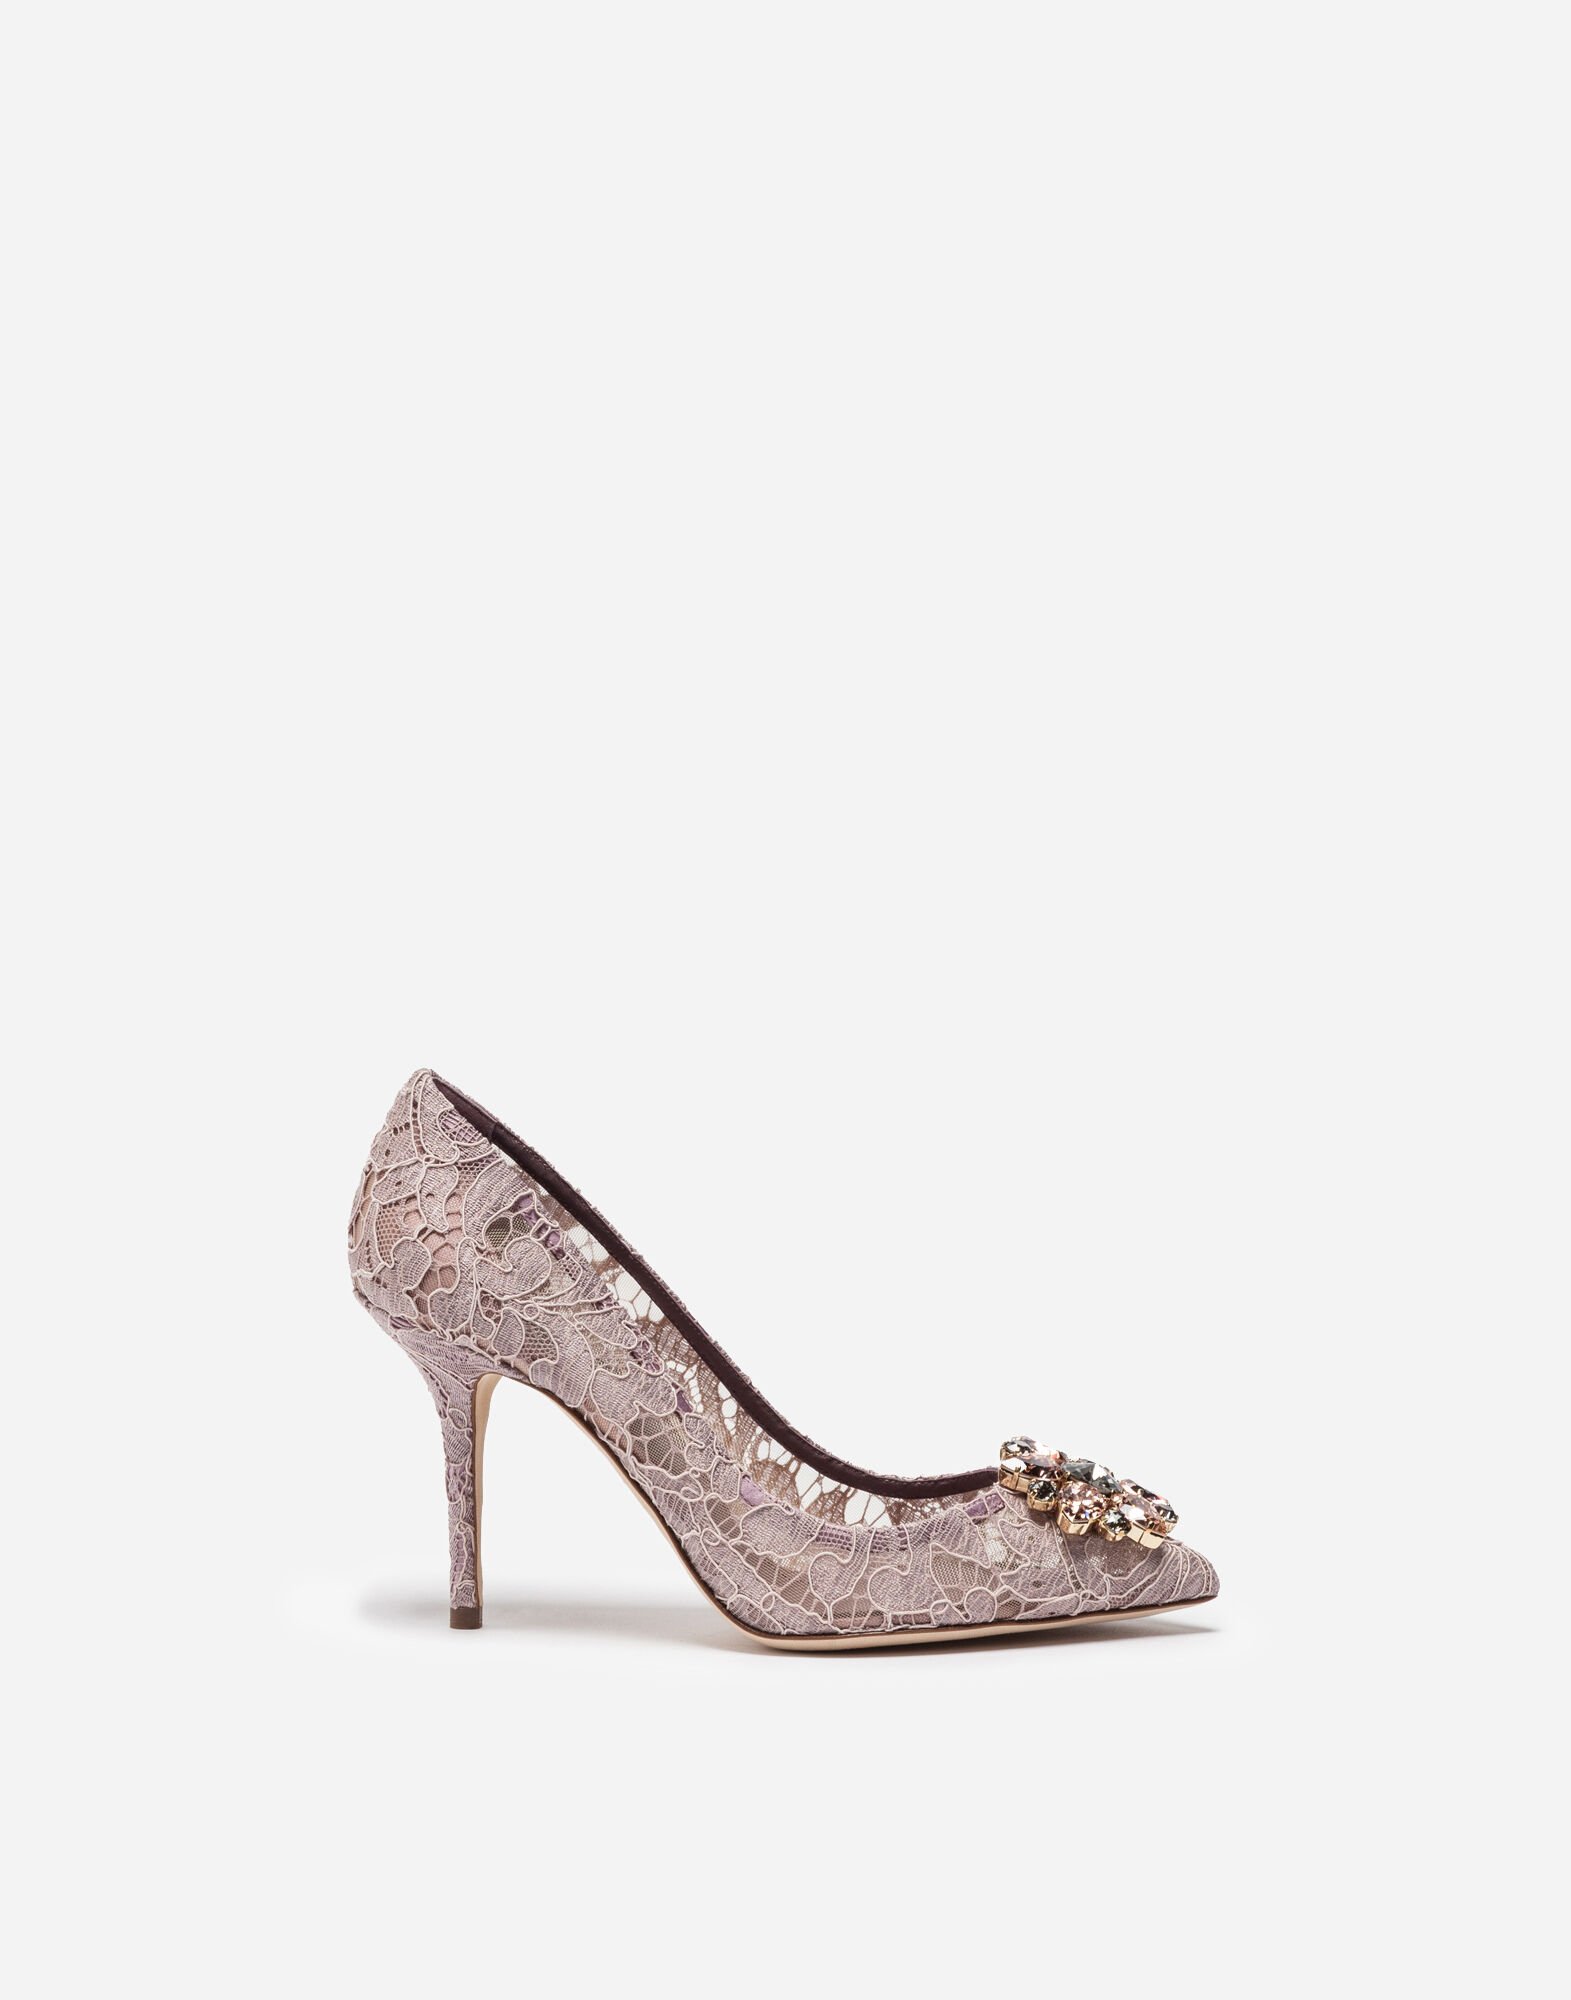 Dolce & Gabbana Lace rainbow pumps with brooch detailing Beige CG0492AQ311